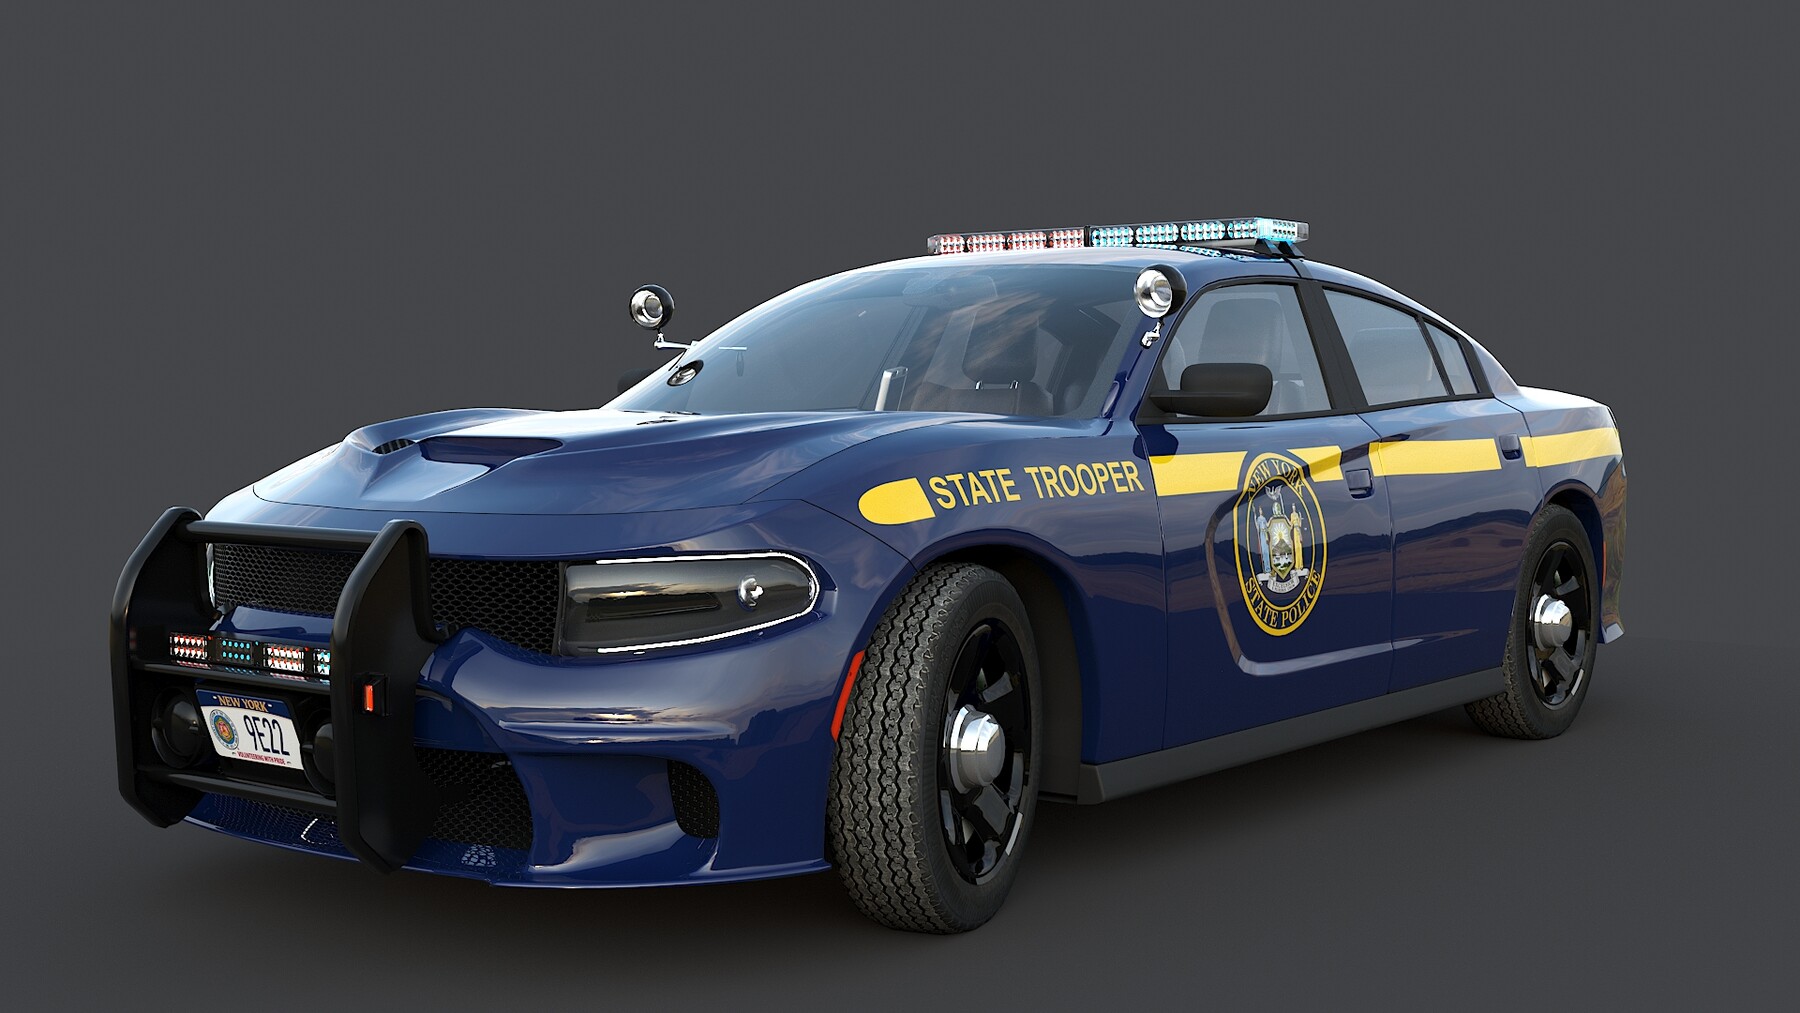 ArtStation - Dodge Charger Hellcat New York State Police | Resources